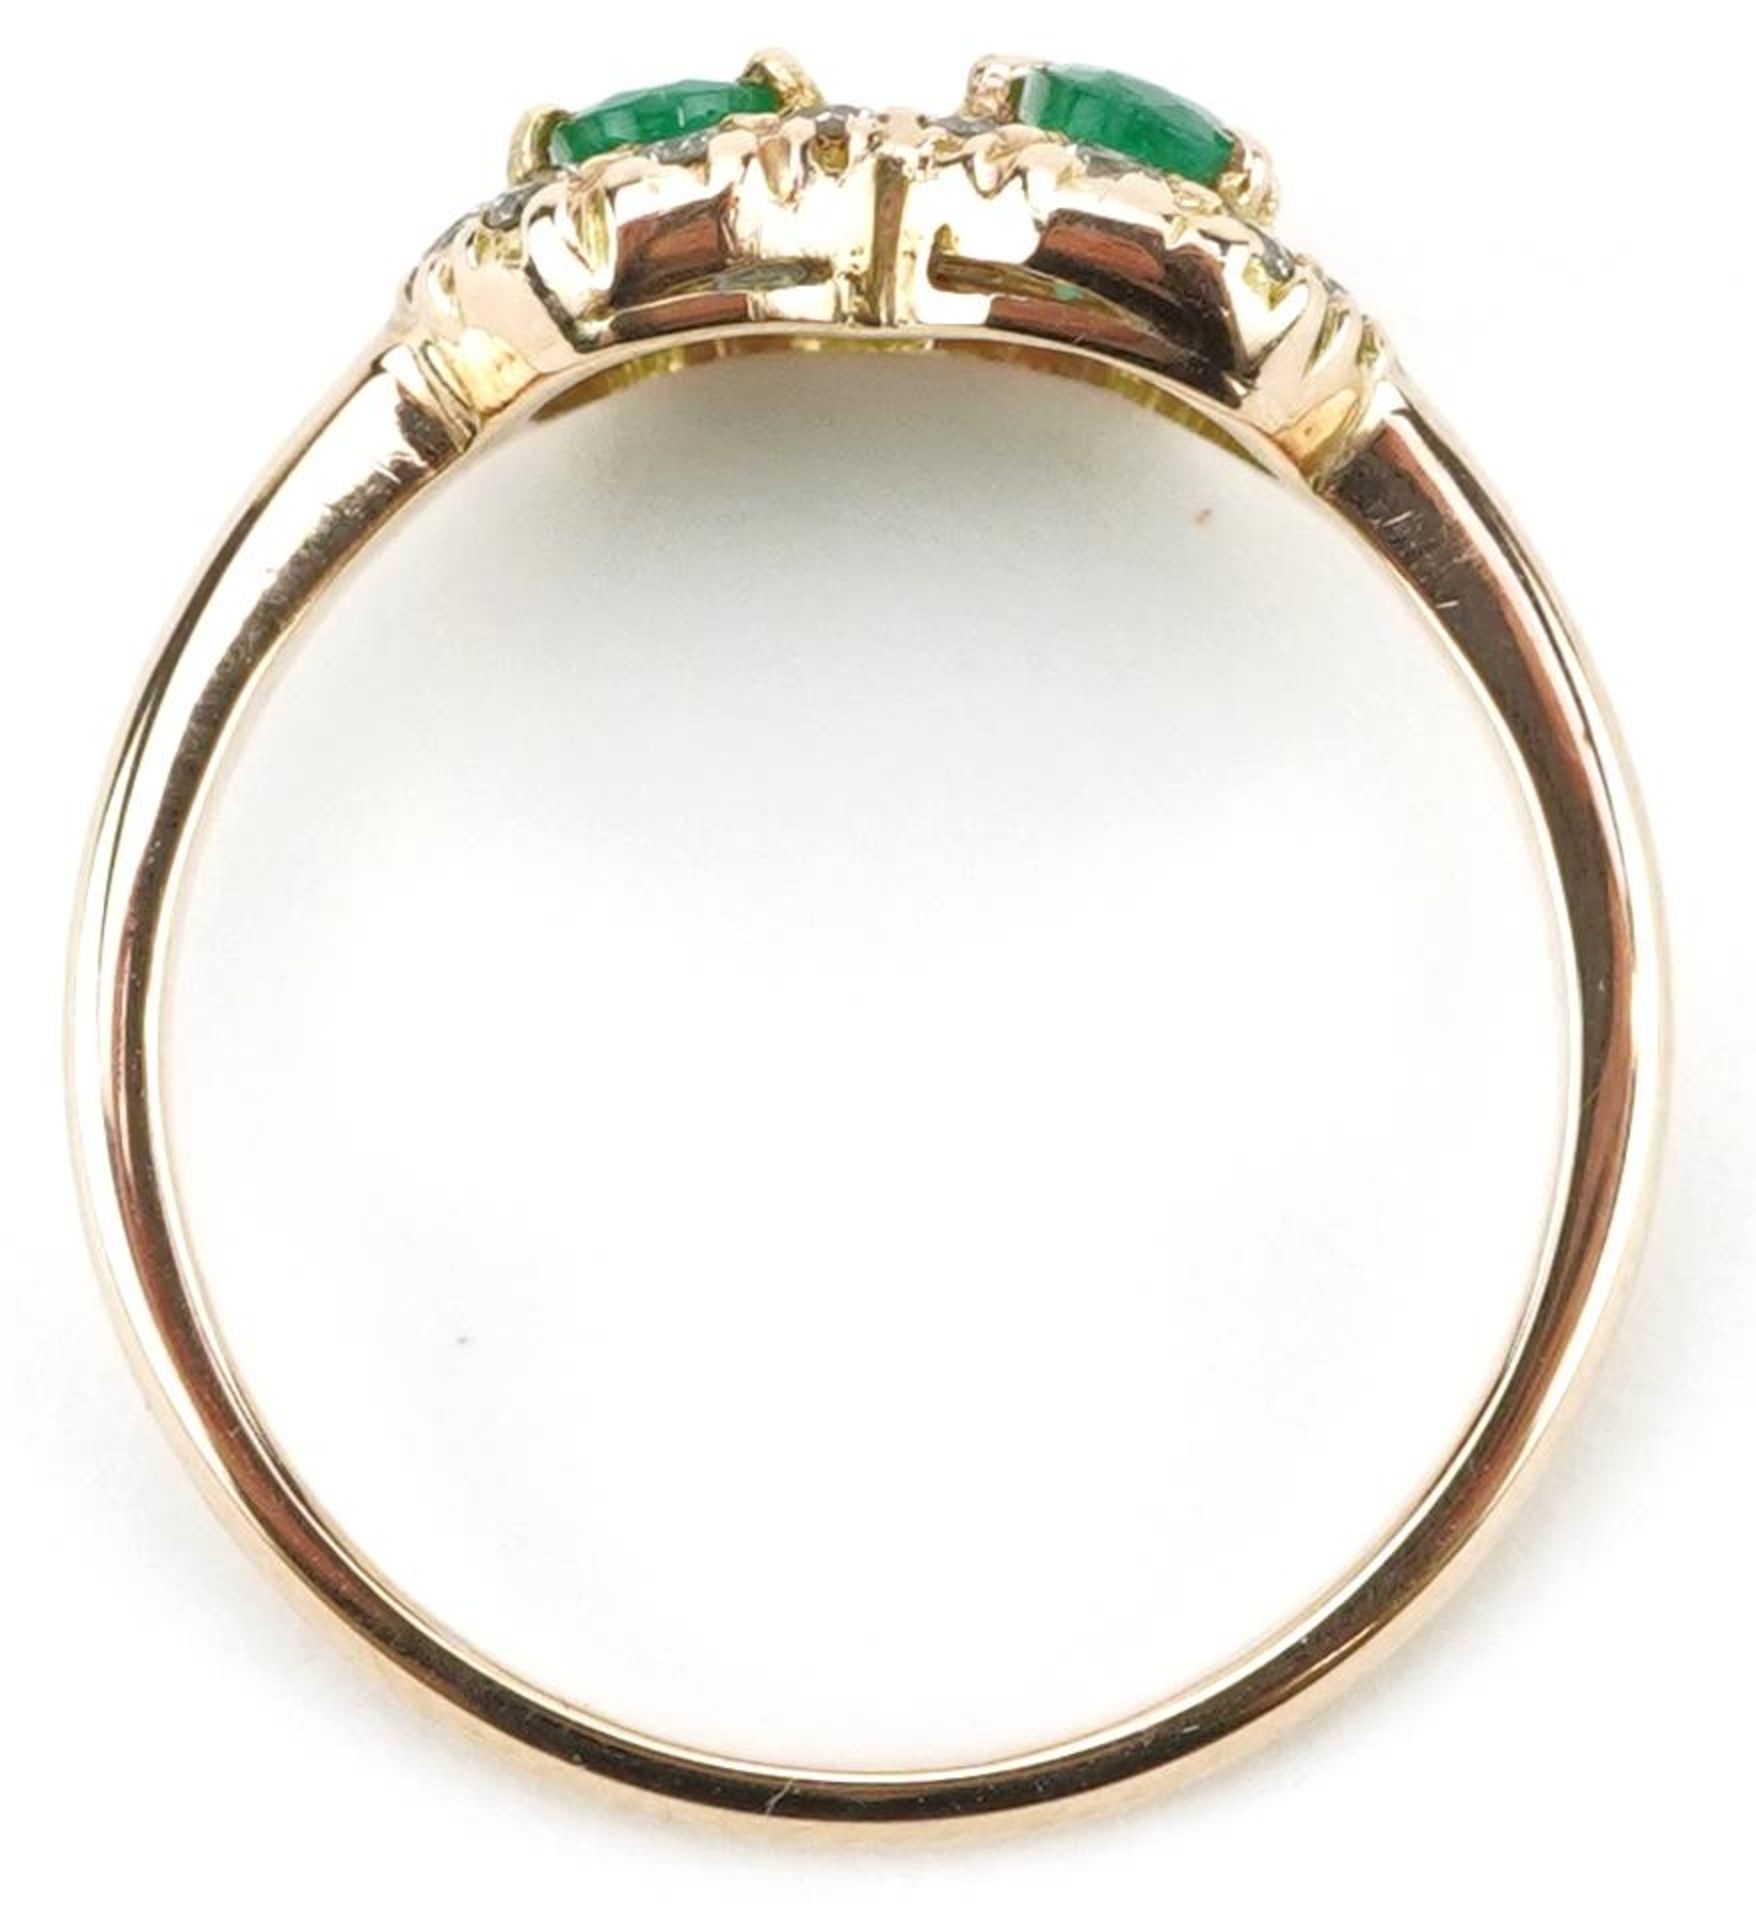 Unmarked gold emerald and diamond Toi et Moi ring, each emerald approximately 5.10mm x 3.10mm x 2. - Image 3 of 3